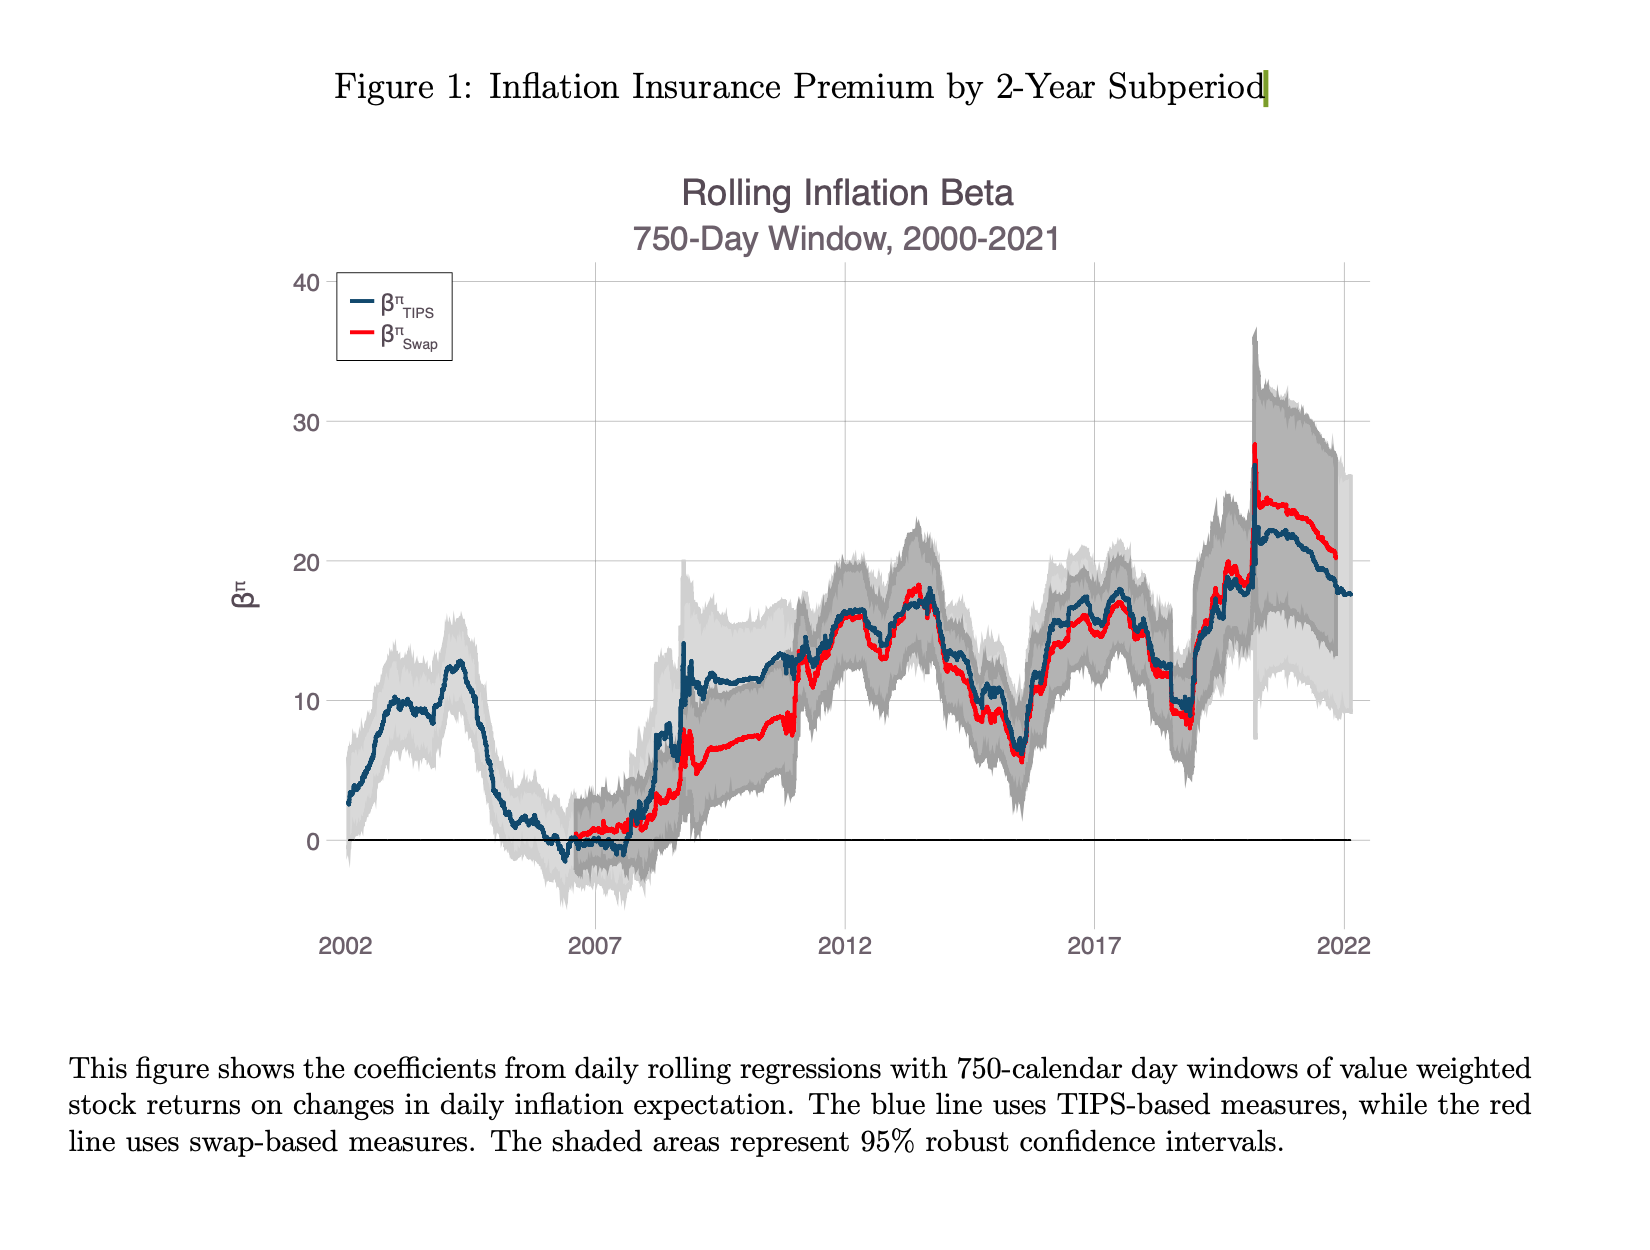 inflation insurance premium by 2-year subperiod